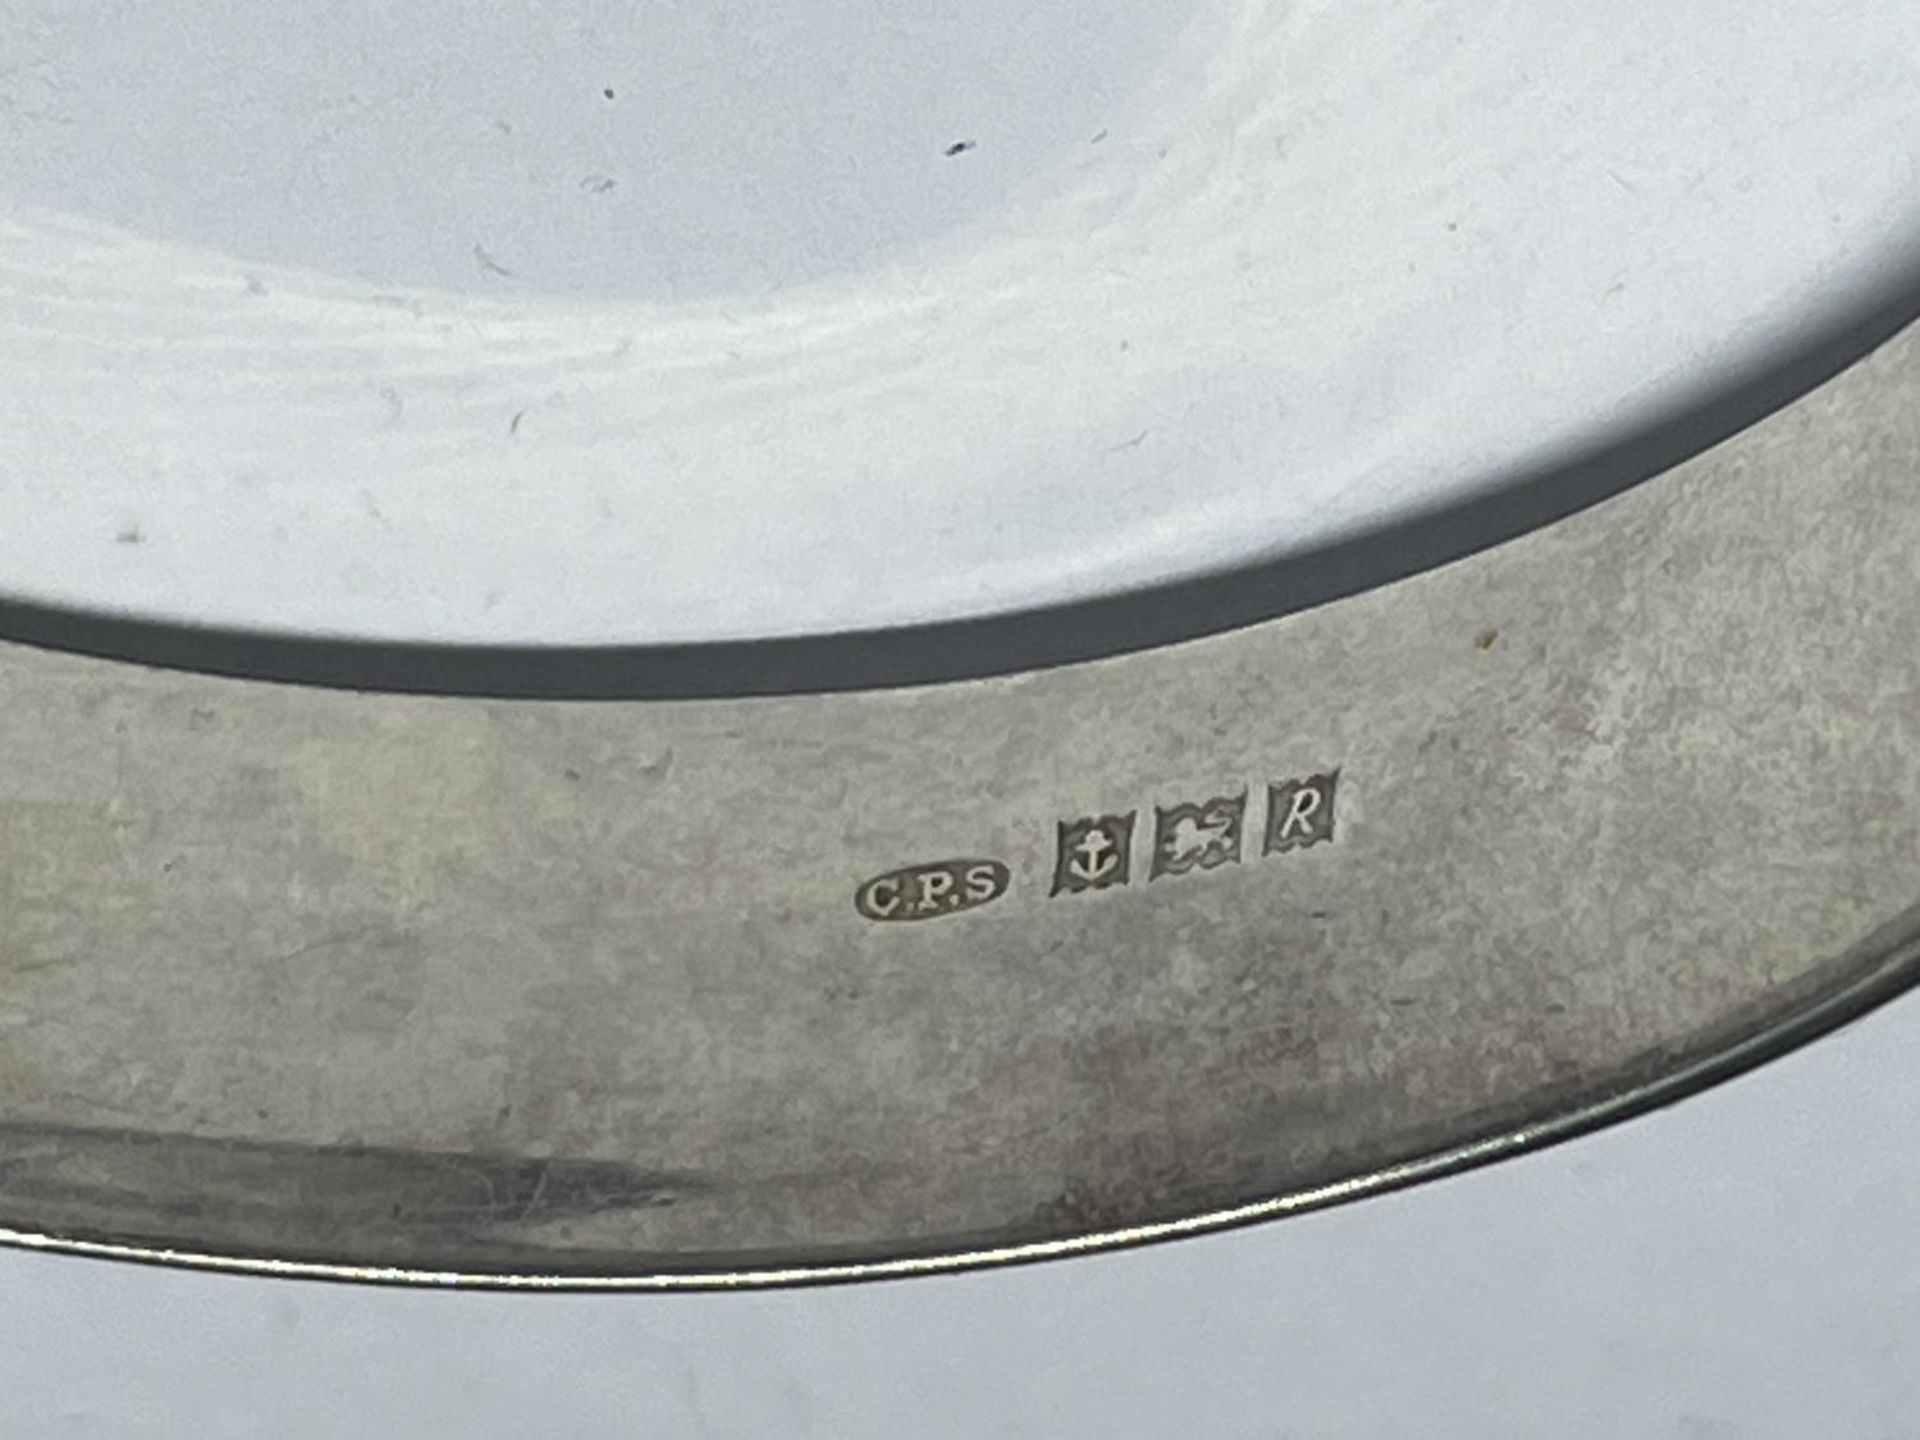 A HALLMARKED BIRMINGHAM SILVER BANGLE WEIGHT 21.3 GRAMS - Image 4 of 4